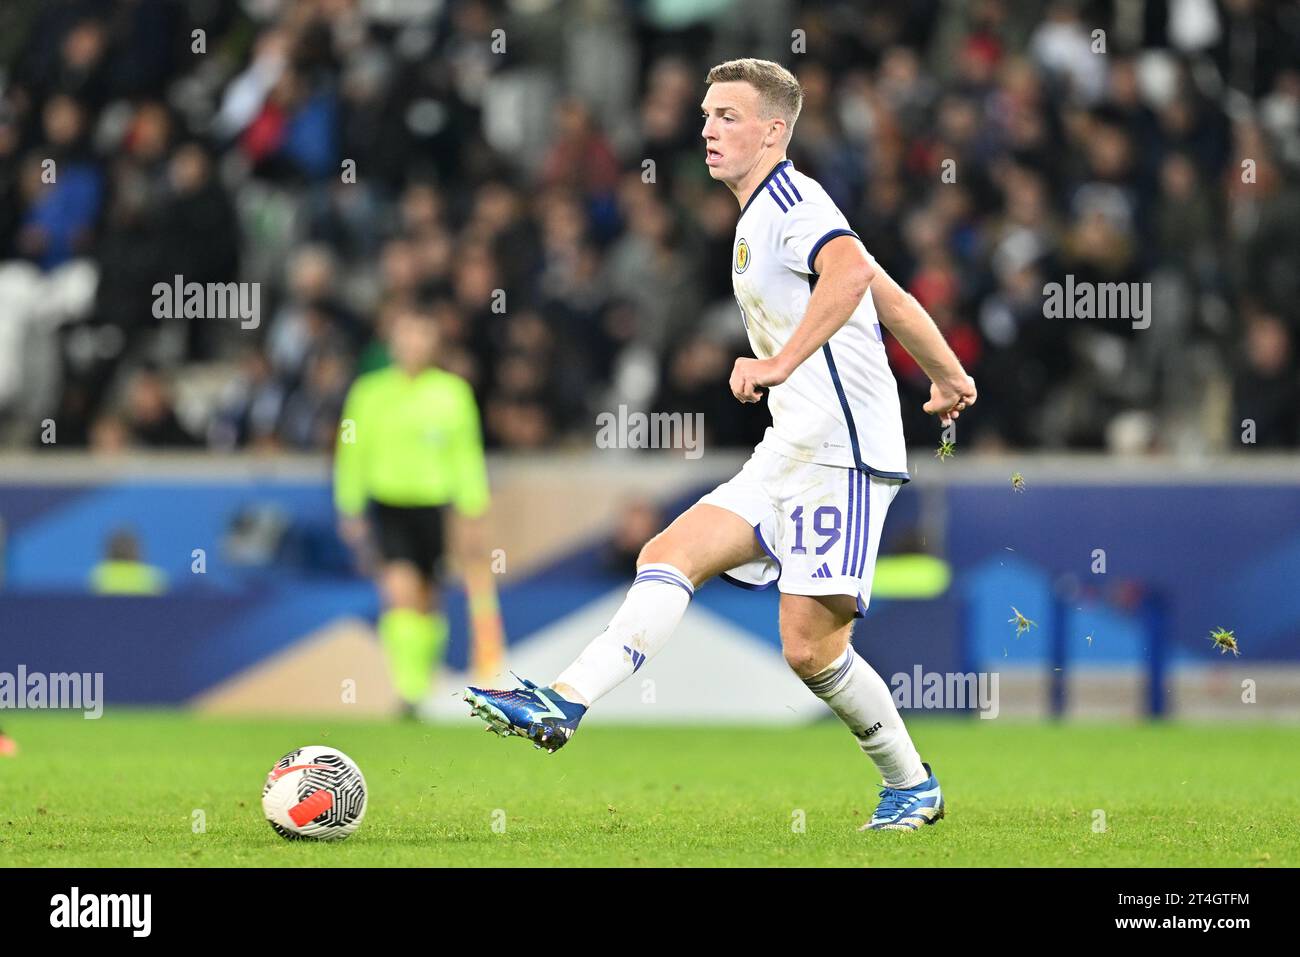 Lewis Ferguson (19) of Scotland pictured during a soccer game between the national teams of France and Scotland in friendly game, on October 17 , 2023 in Lille, France. (Photo by David Catry / Sportpix) Stock Photo